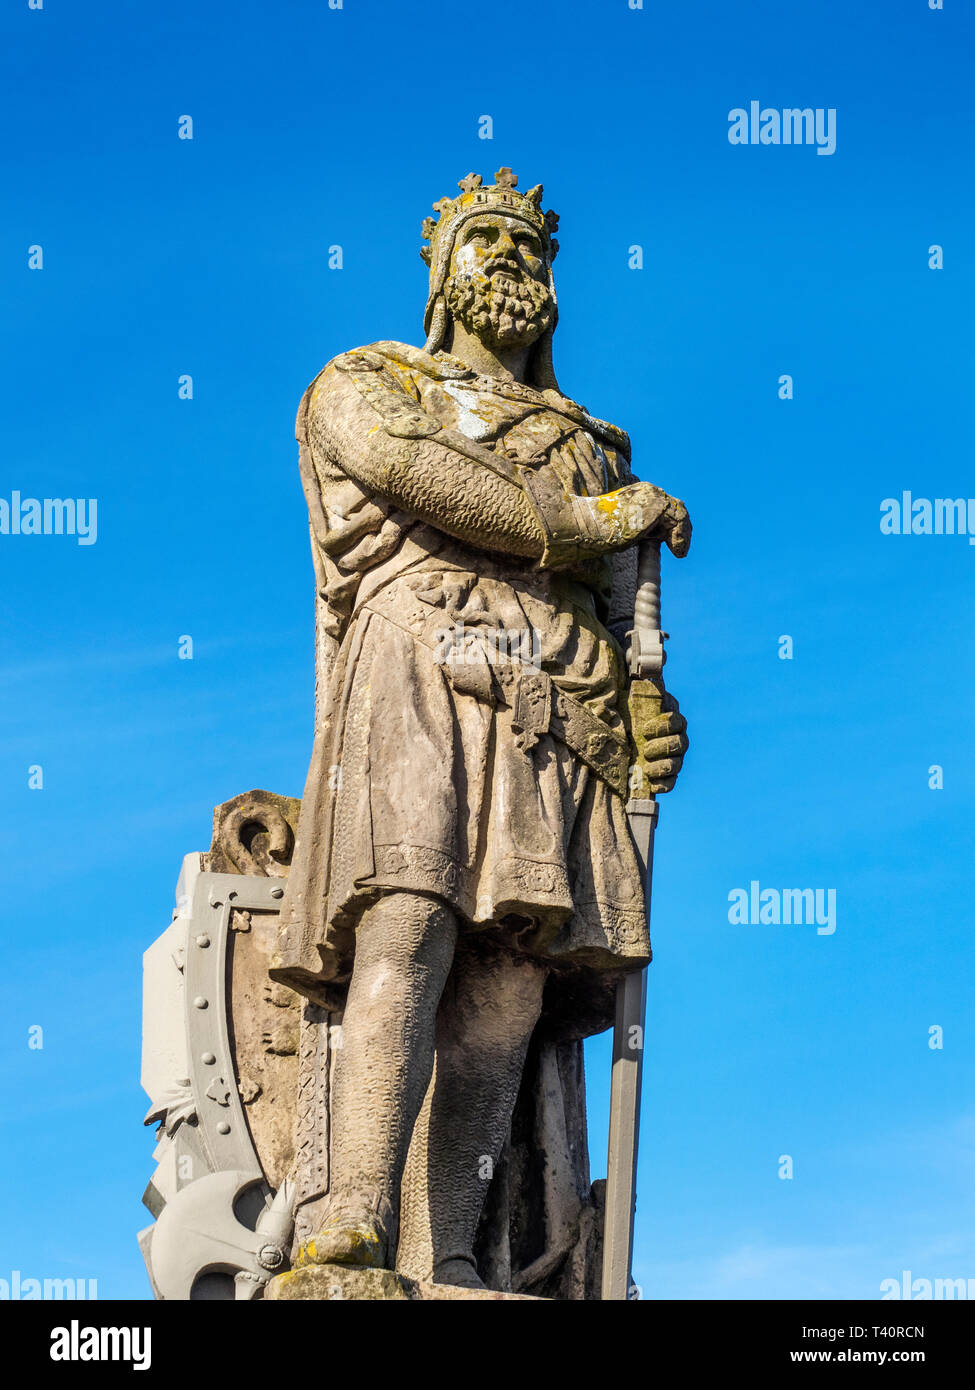 King Robert The Bruce Statue at Stirling Castle City of Stirling Scotland Stock Photo